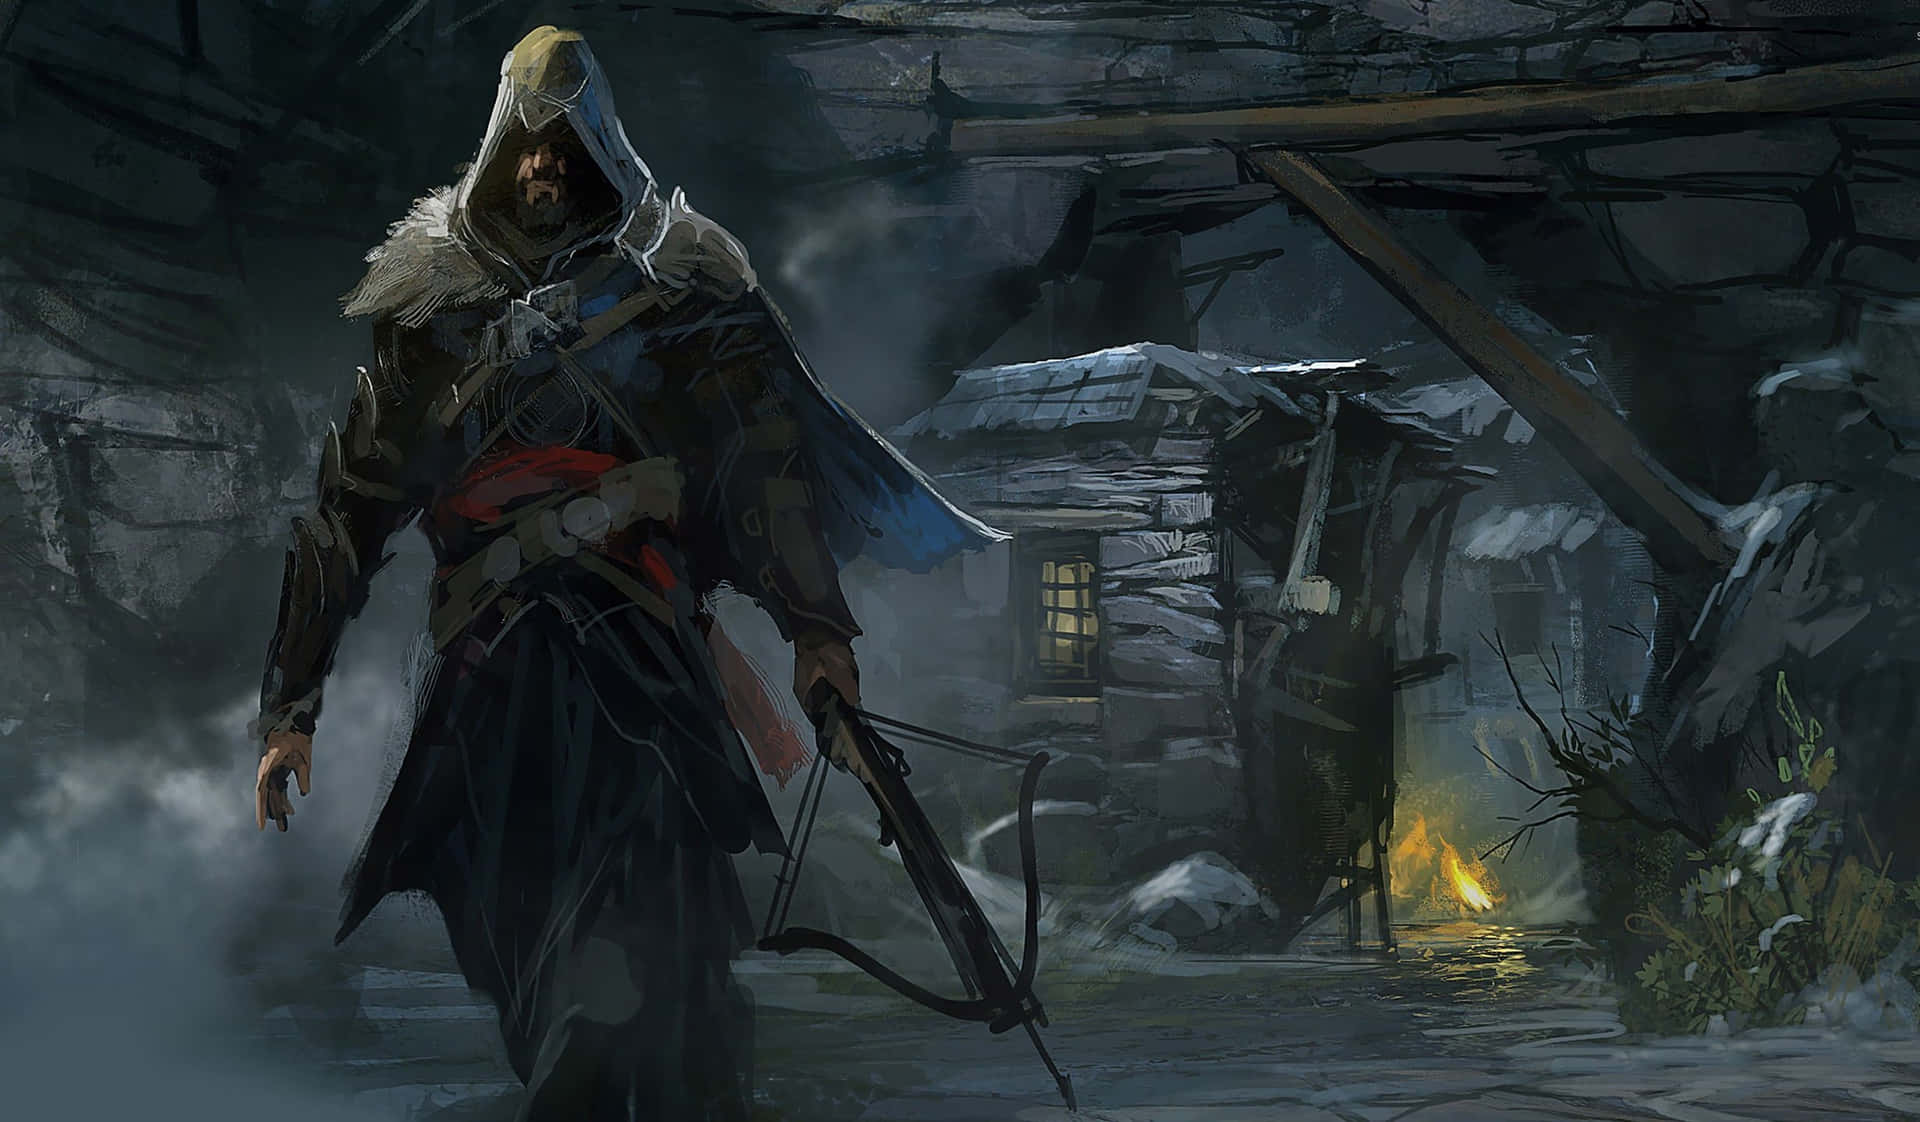 Assassin's Creed: Revelations Game for Android - Download